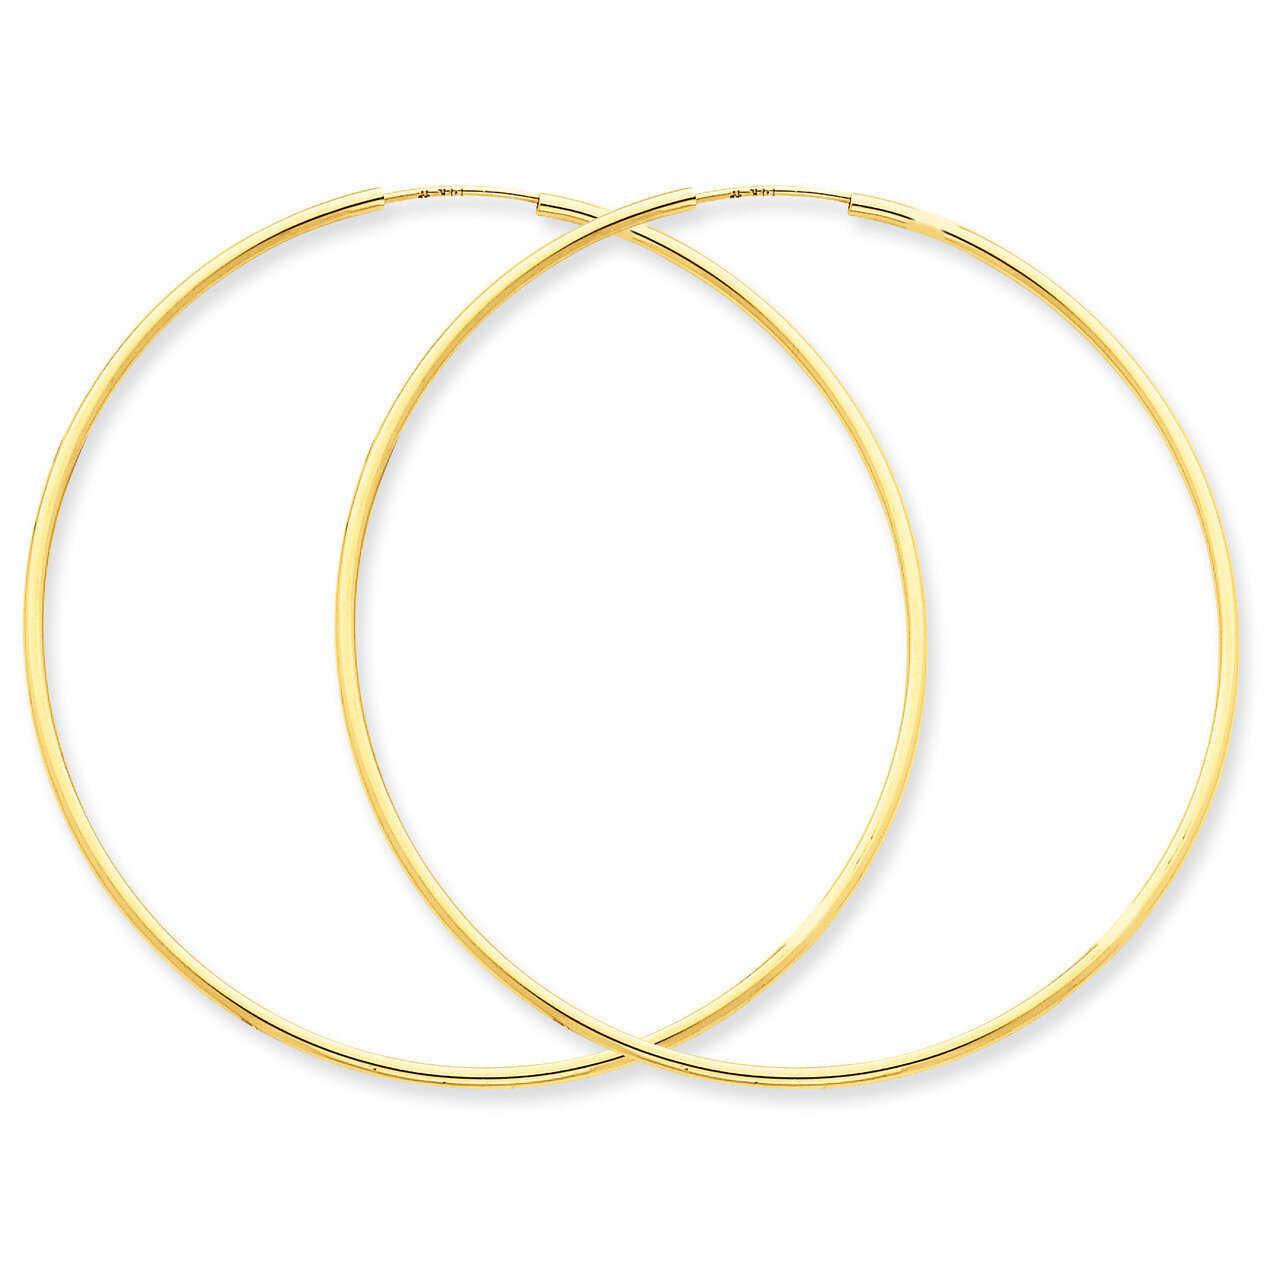 1.5mm Polished Round Endless Hoop Earrings 14k Gold XY1167